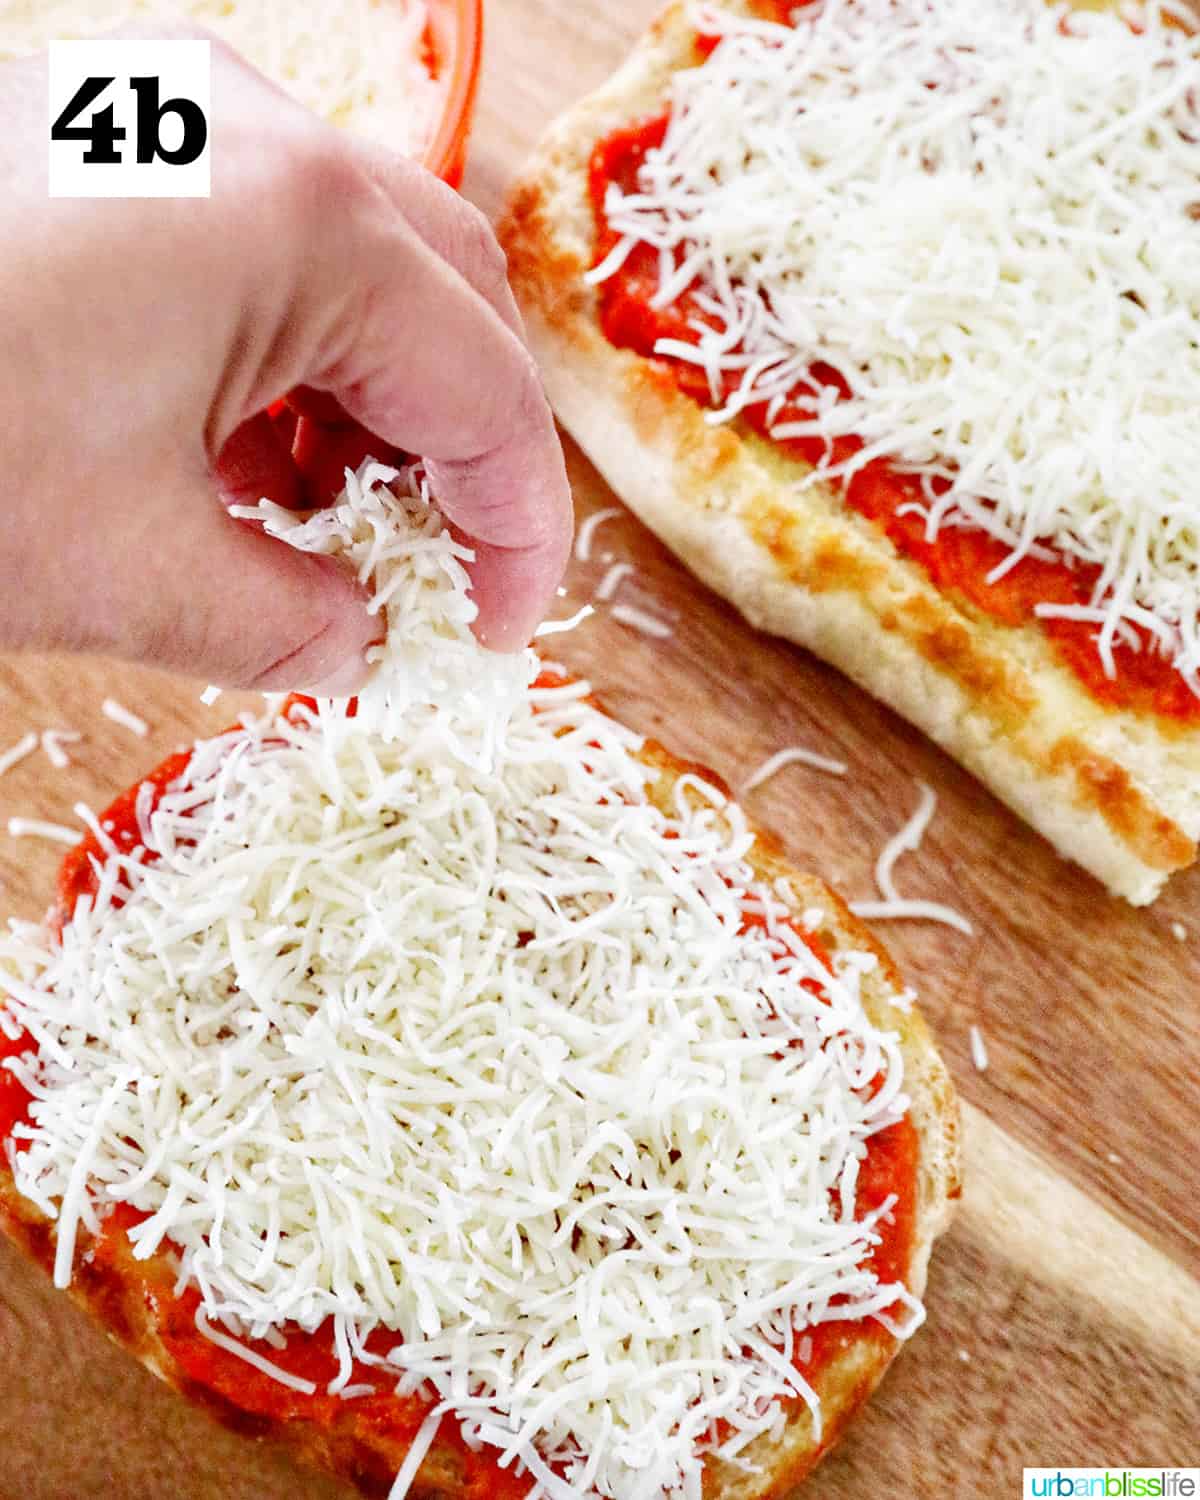 two halves of french bread topped with pizza sauce and cheese on a cutting board.